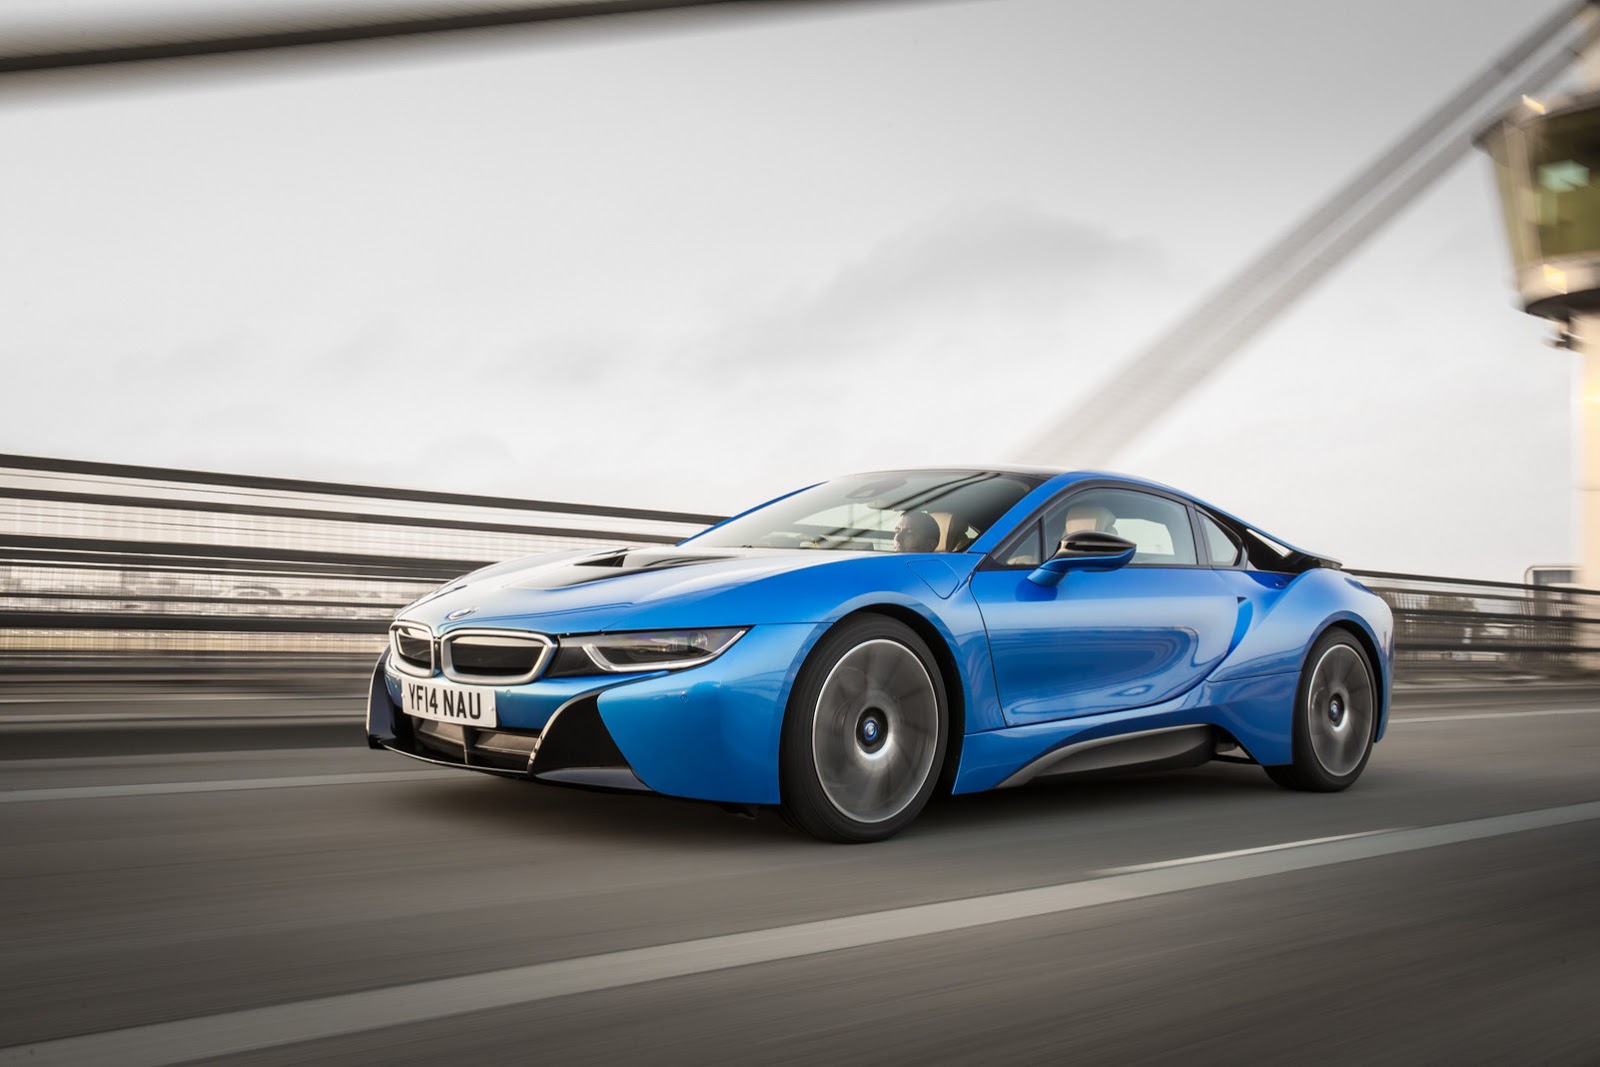 2015 BMW i8 Review - Supercar for Environmentalists